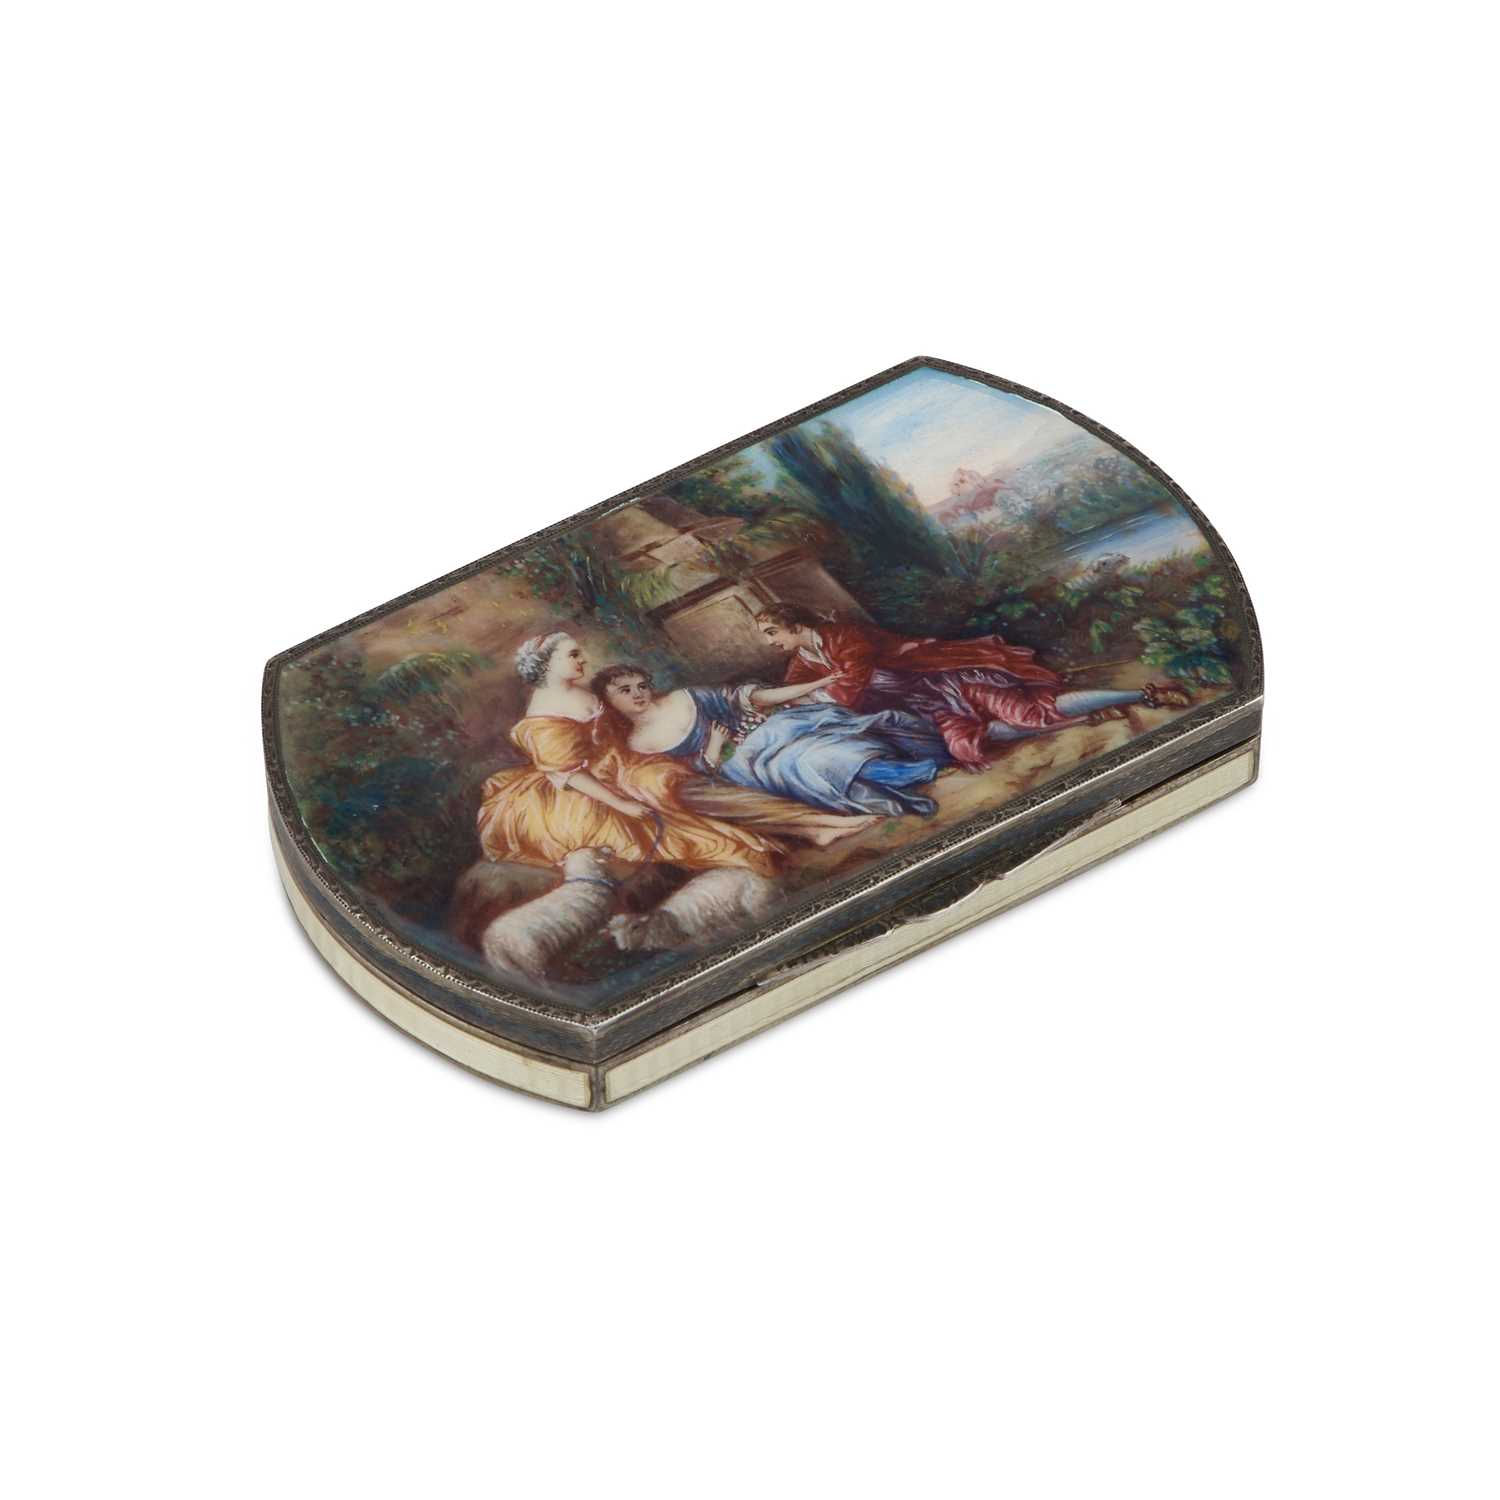 AN EARLY 20TH CENTURY CONTINENTAL SILVER AND ENAMEL CASE